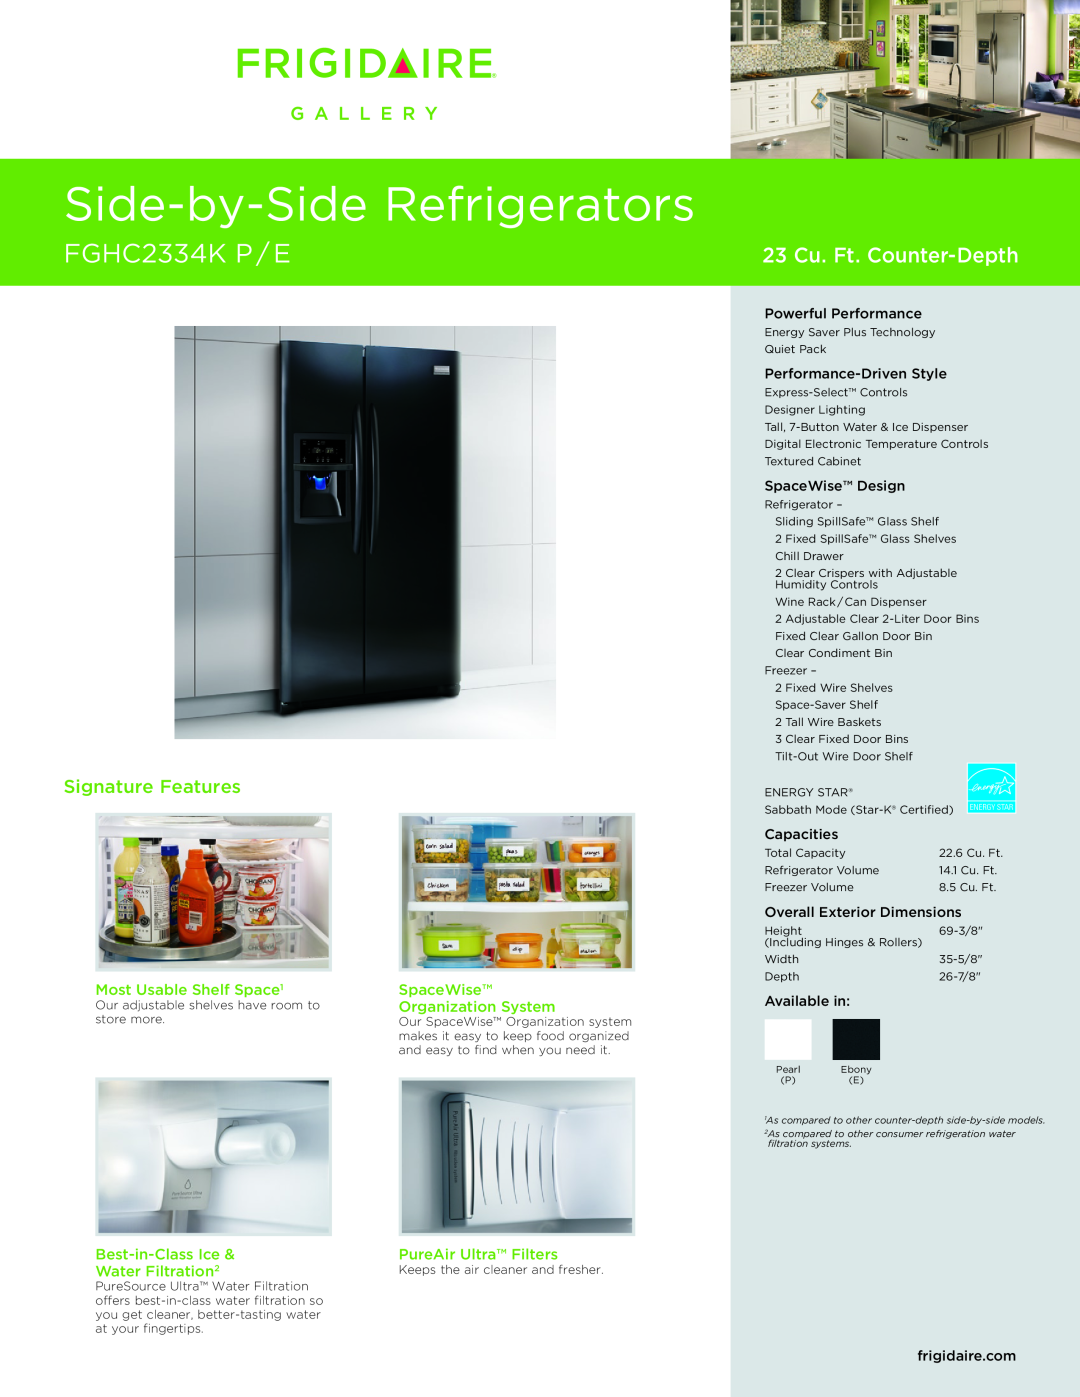 Frigidaire FGHC2334K P/E dimensions Most Usable Shelf Space1, SpaceWise, Organization System, Best-in-ClassIce, Capacities 